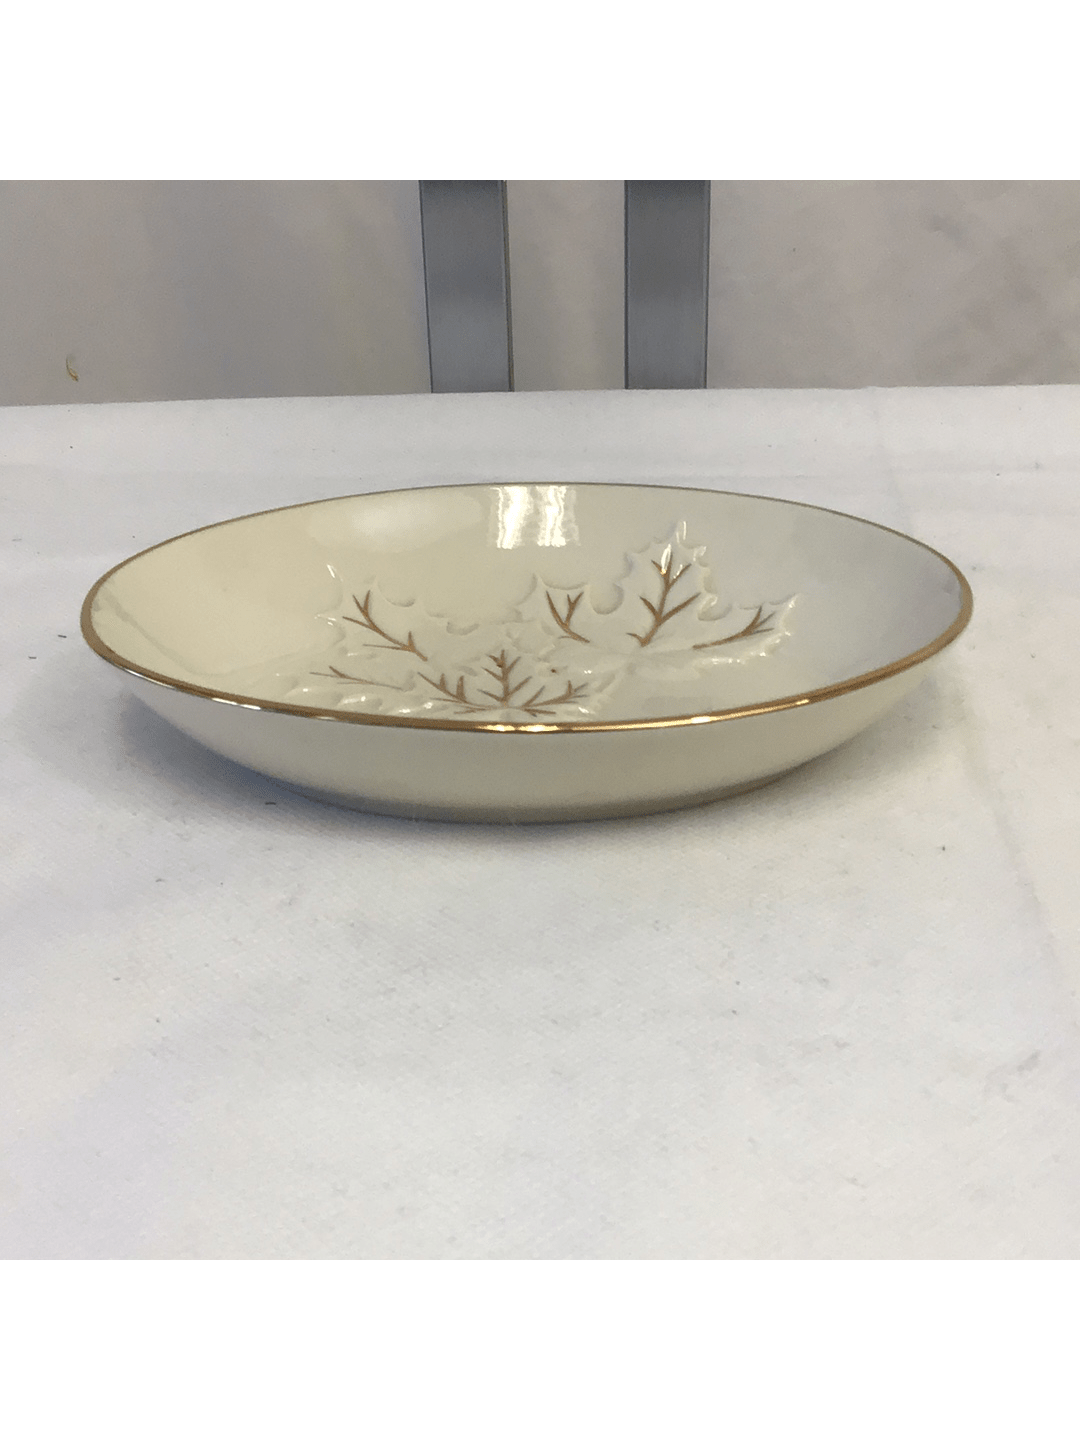 Lenox Maple Leaf Trinket Candy Oval Dish - The Kennedy Collective Thrift - 